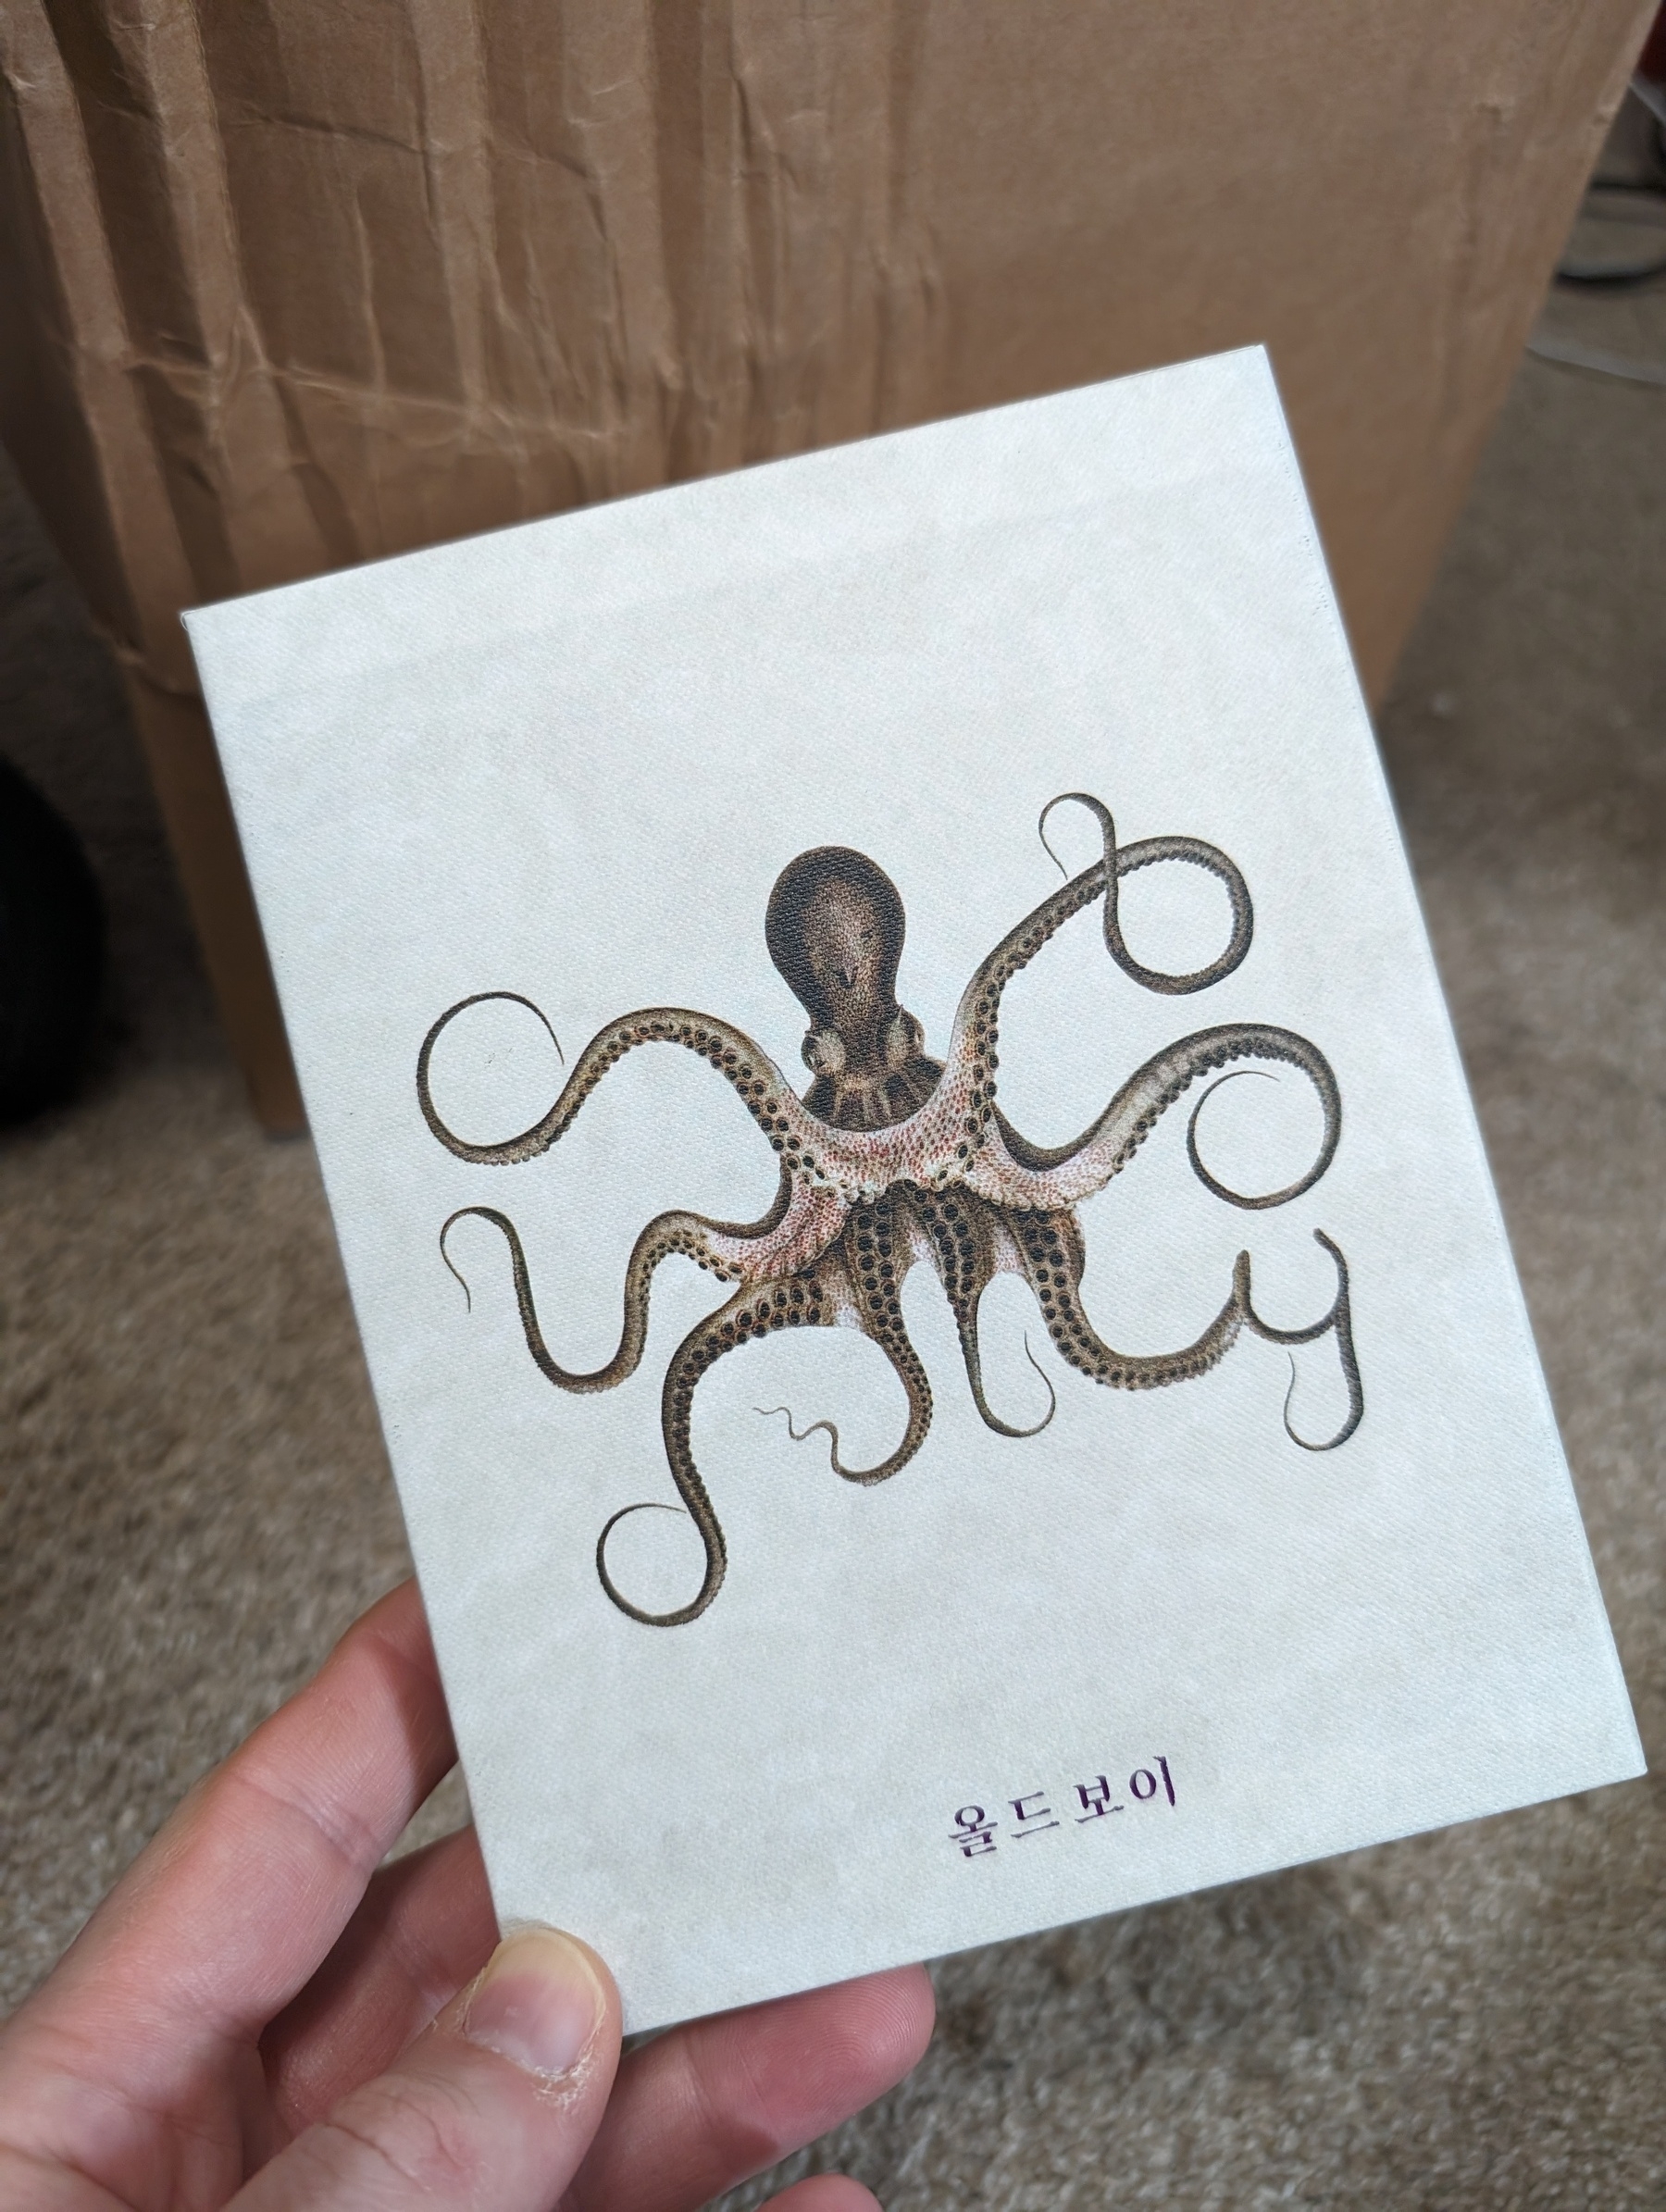 Photo of 4K Ultra HD casing for the special edition of Oldboy. Featured is an octopus, the arms of the octopus spell out the name, OLDBOY.